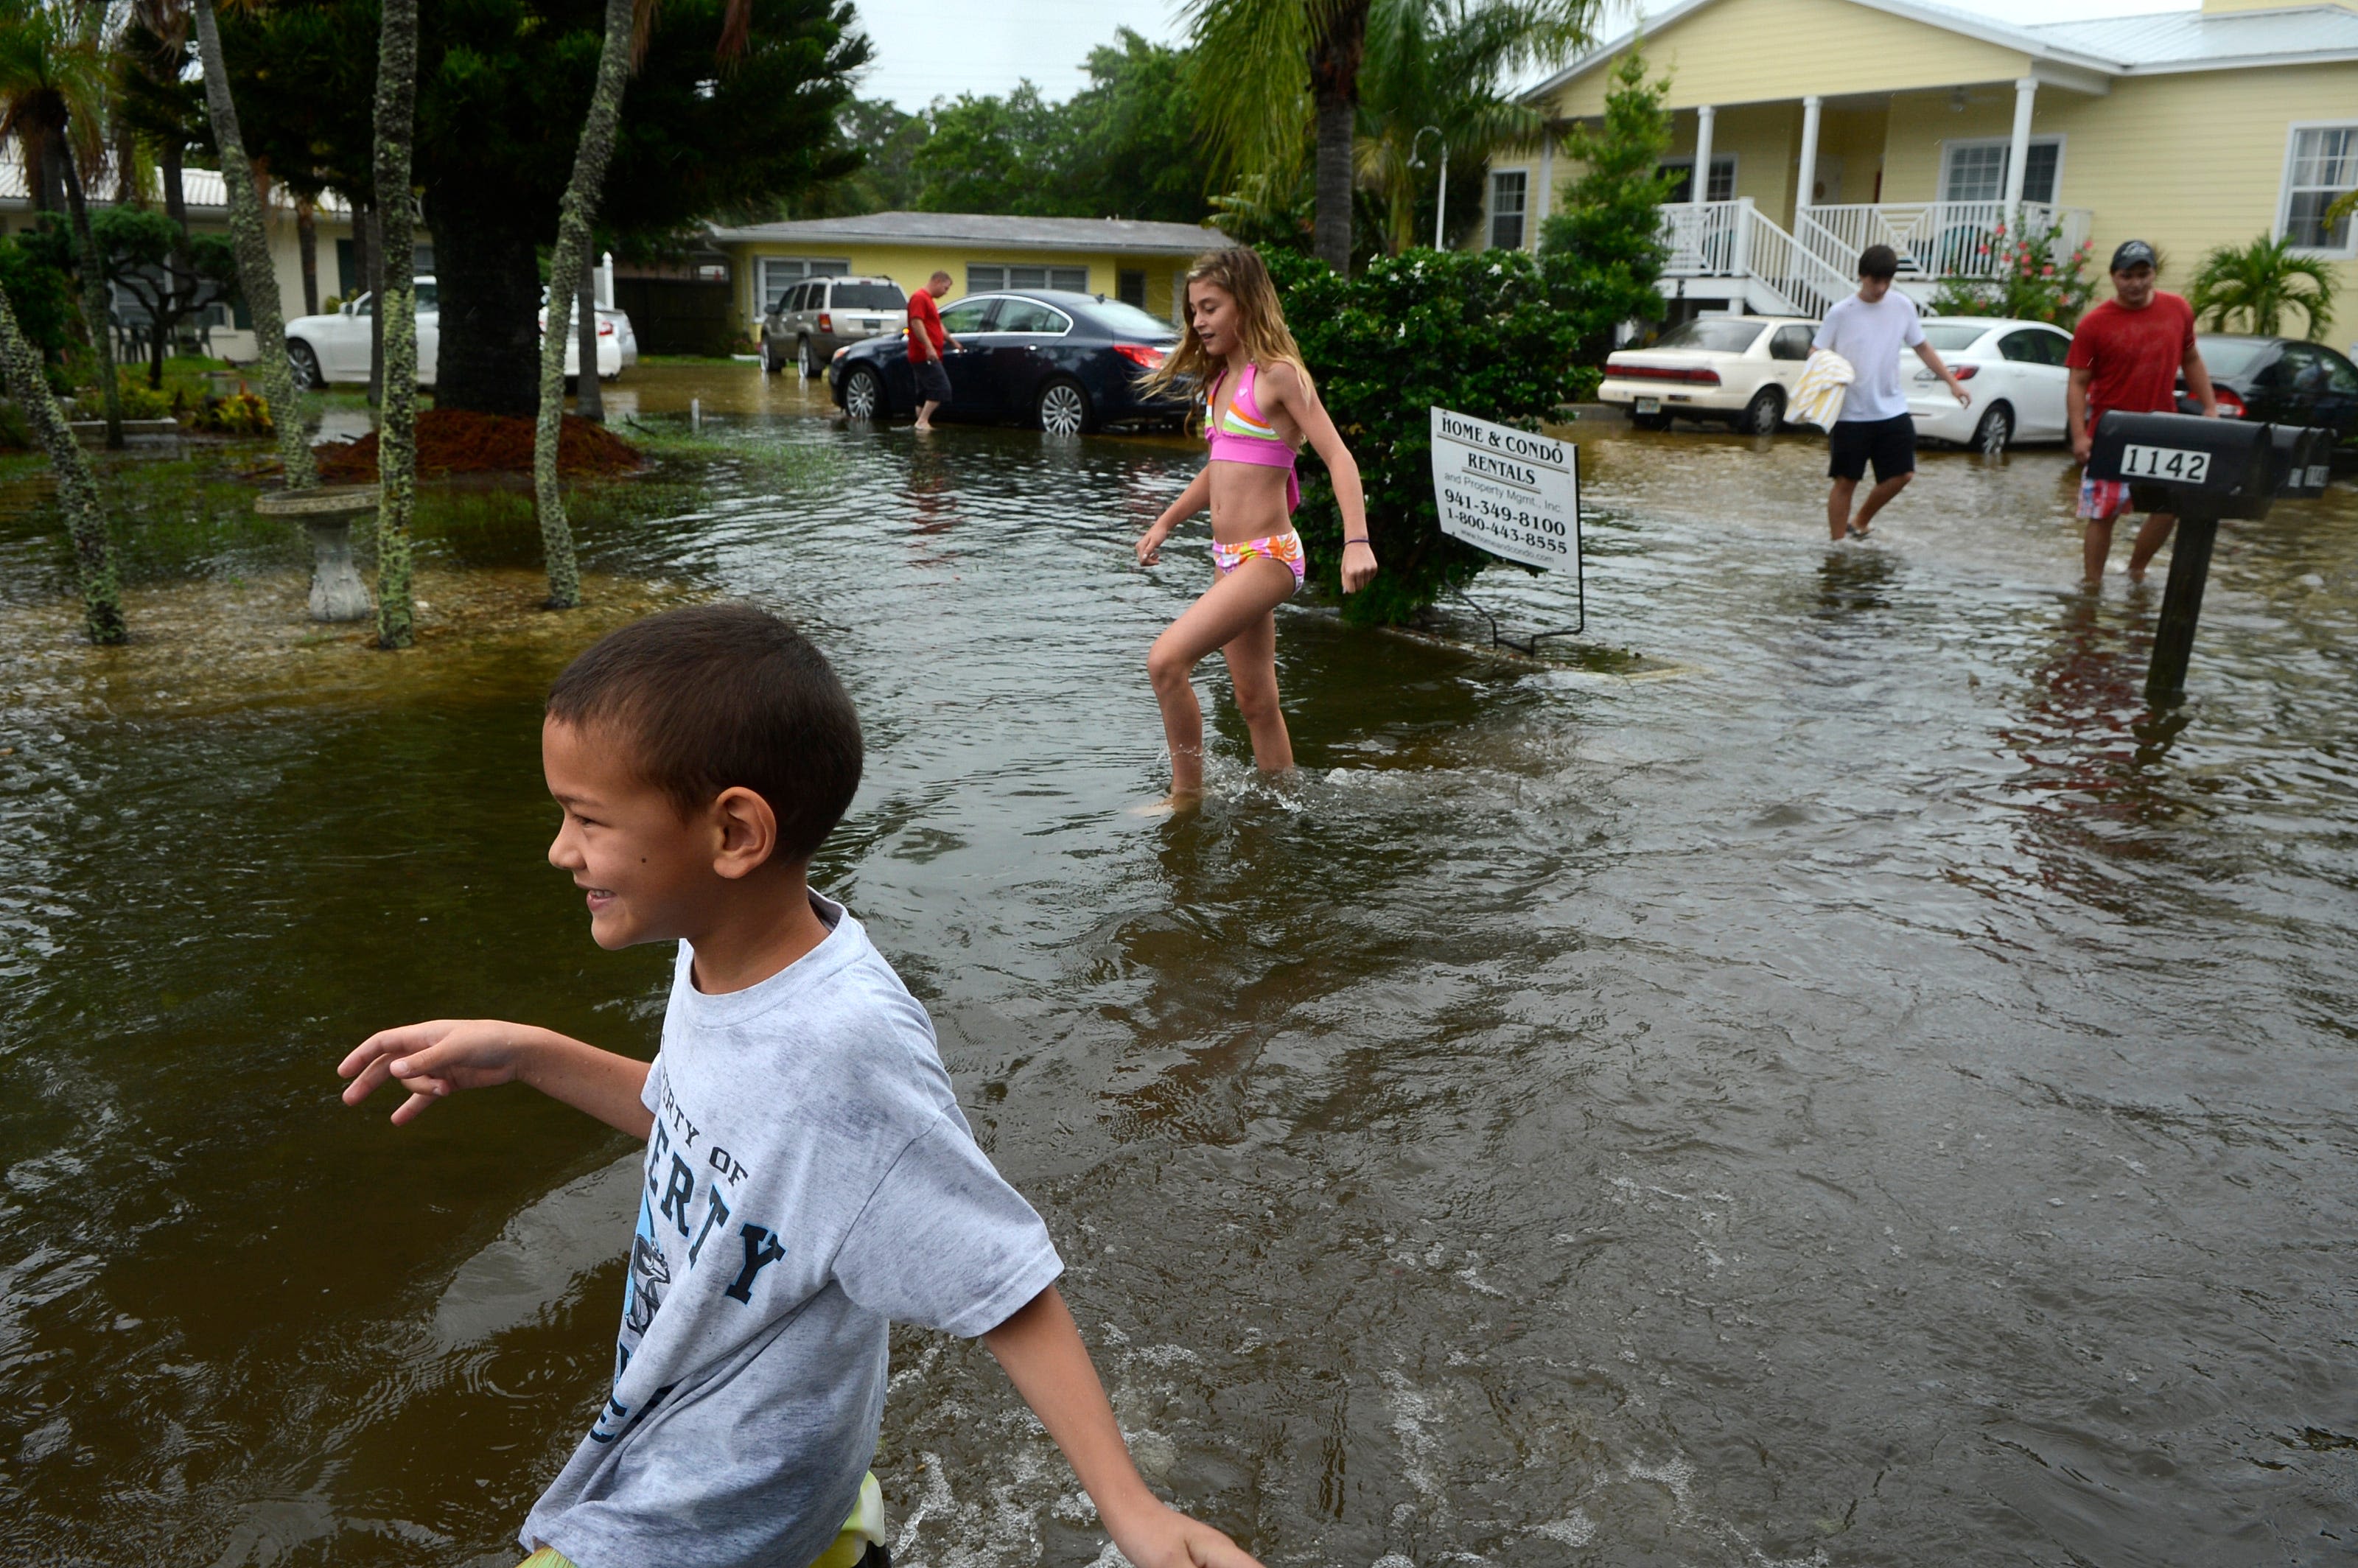 Will Sarasota experience another Tropical Storm Debby, like it did in 2012?